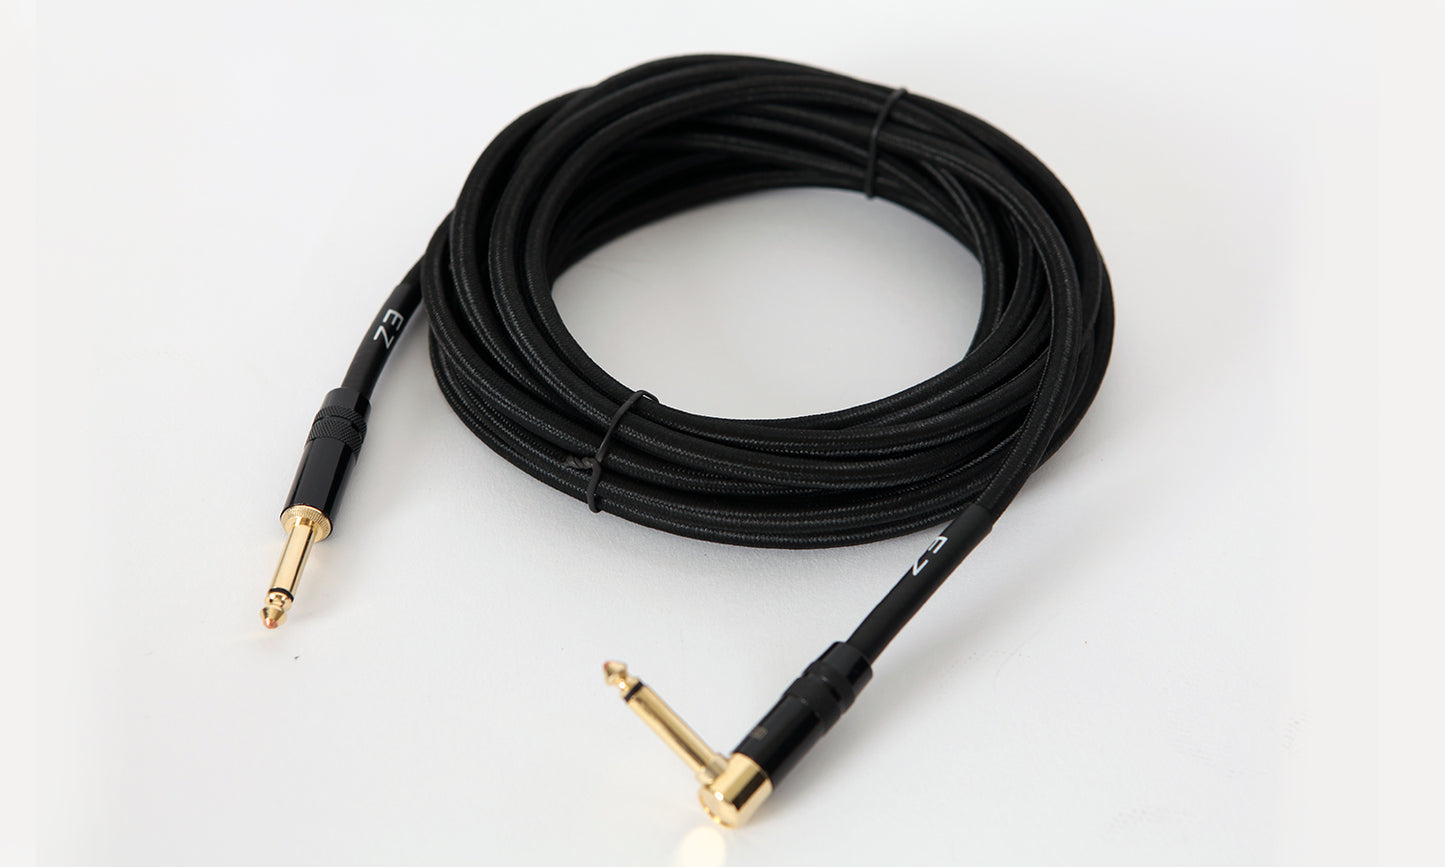 Leem Professional Guitar Cable 20ft Straight to Angle